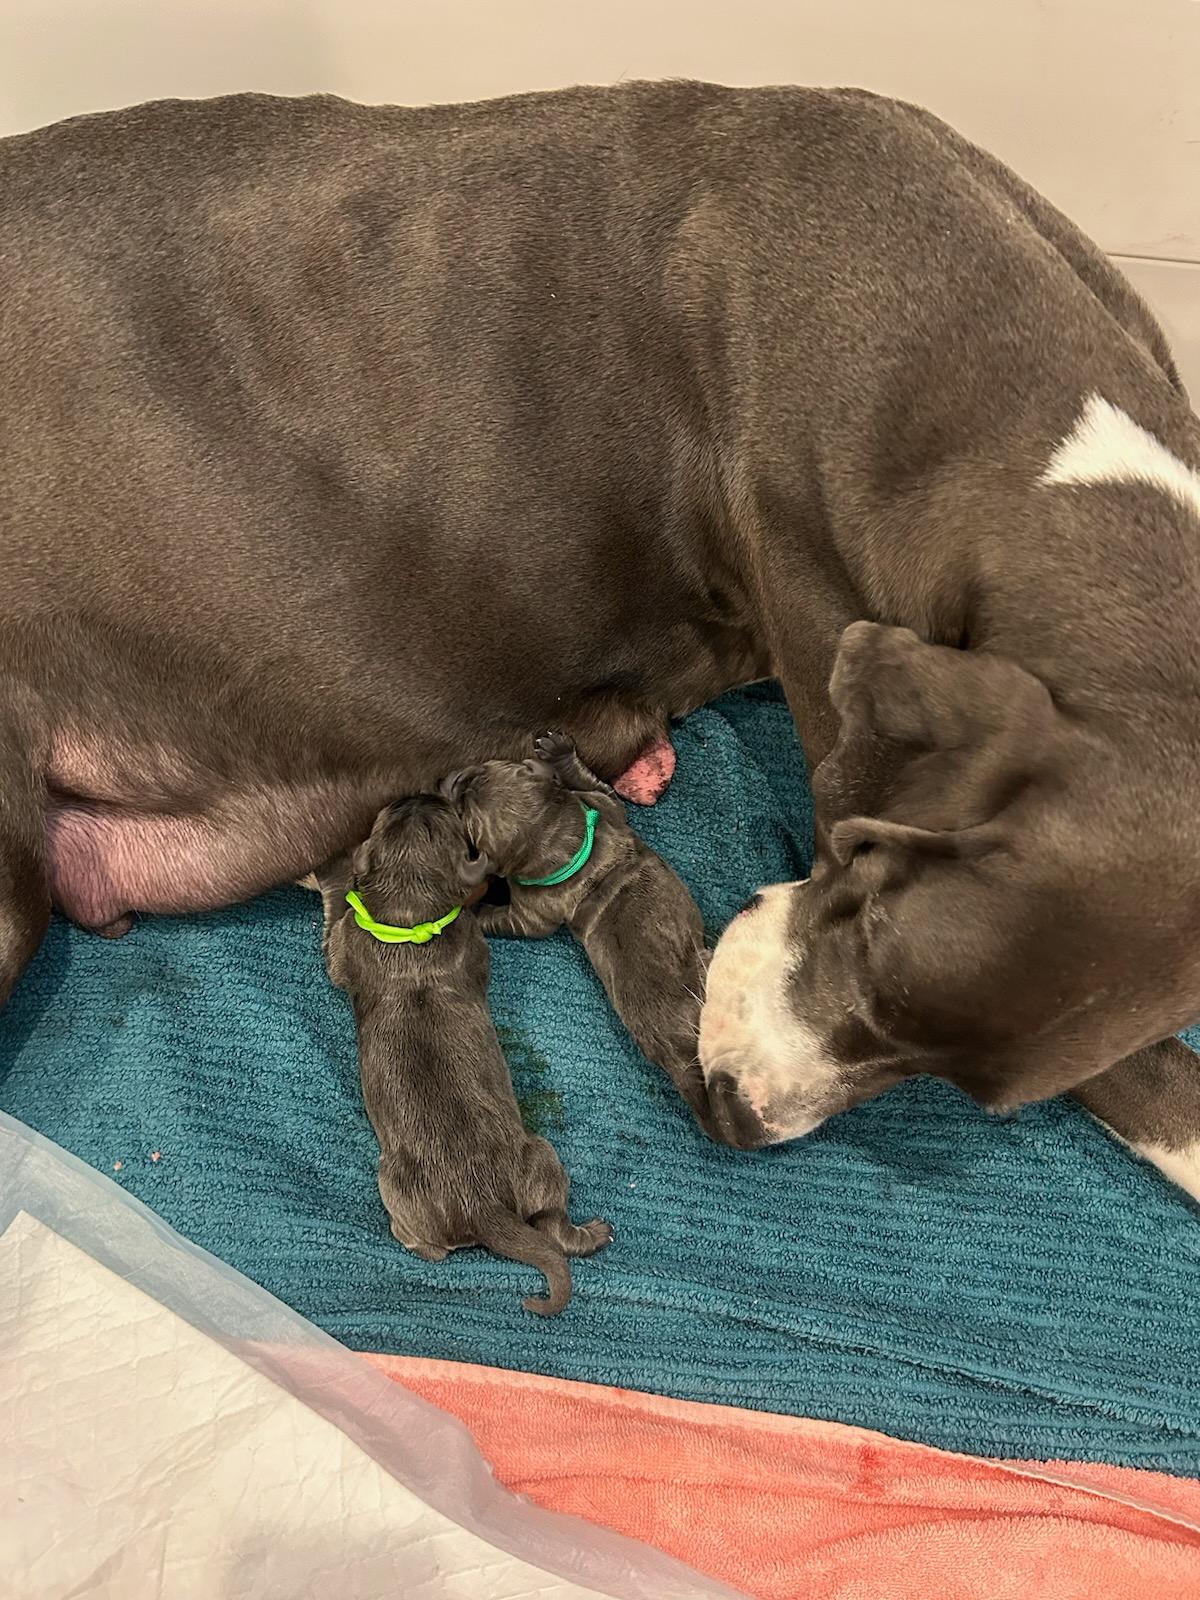 Meadow nursing her litter of puppies. (Courtesy of Perfectly Imperfect Pups)